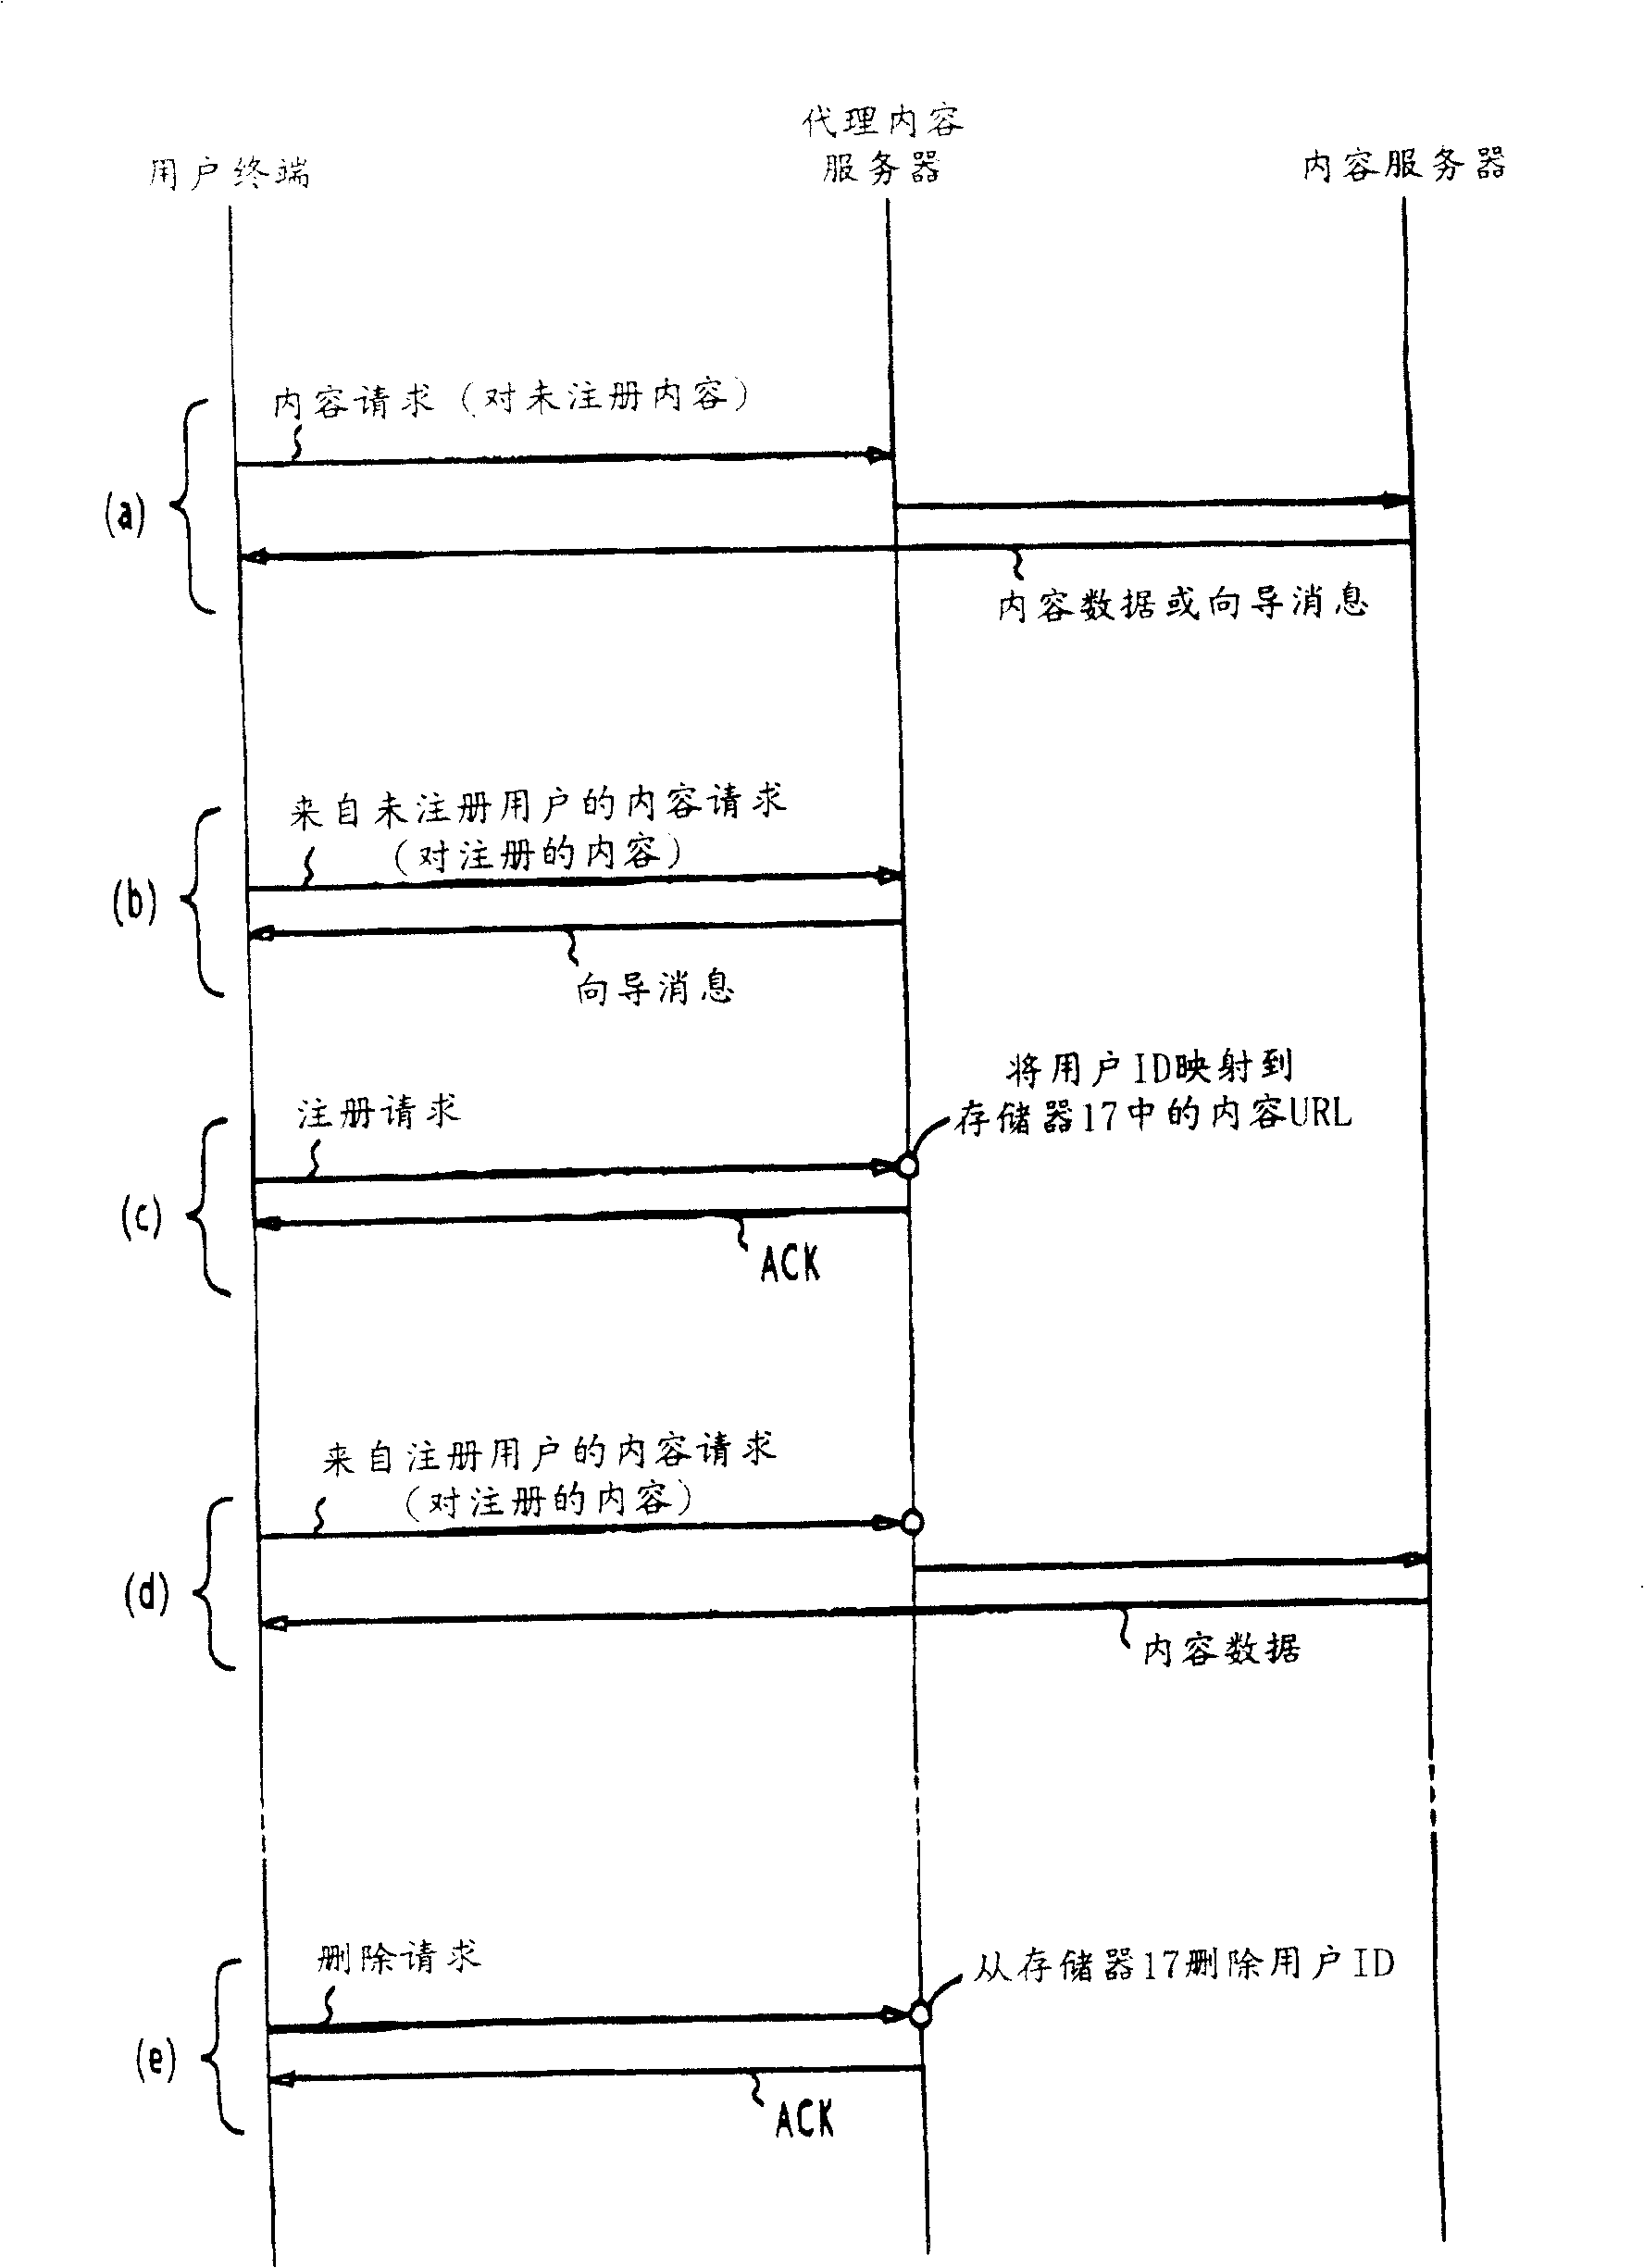 Content transmitting system using agent content service device